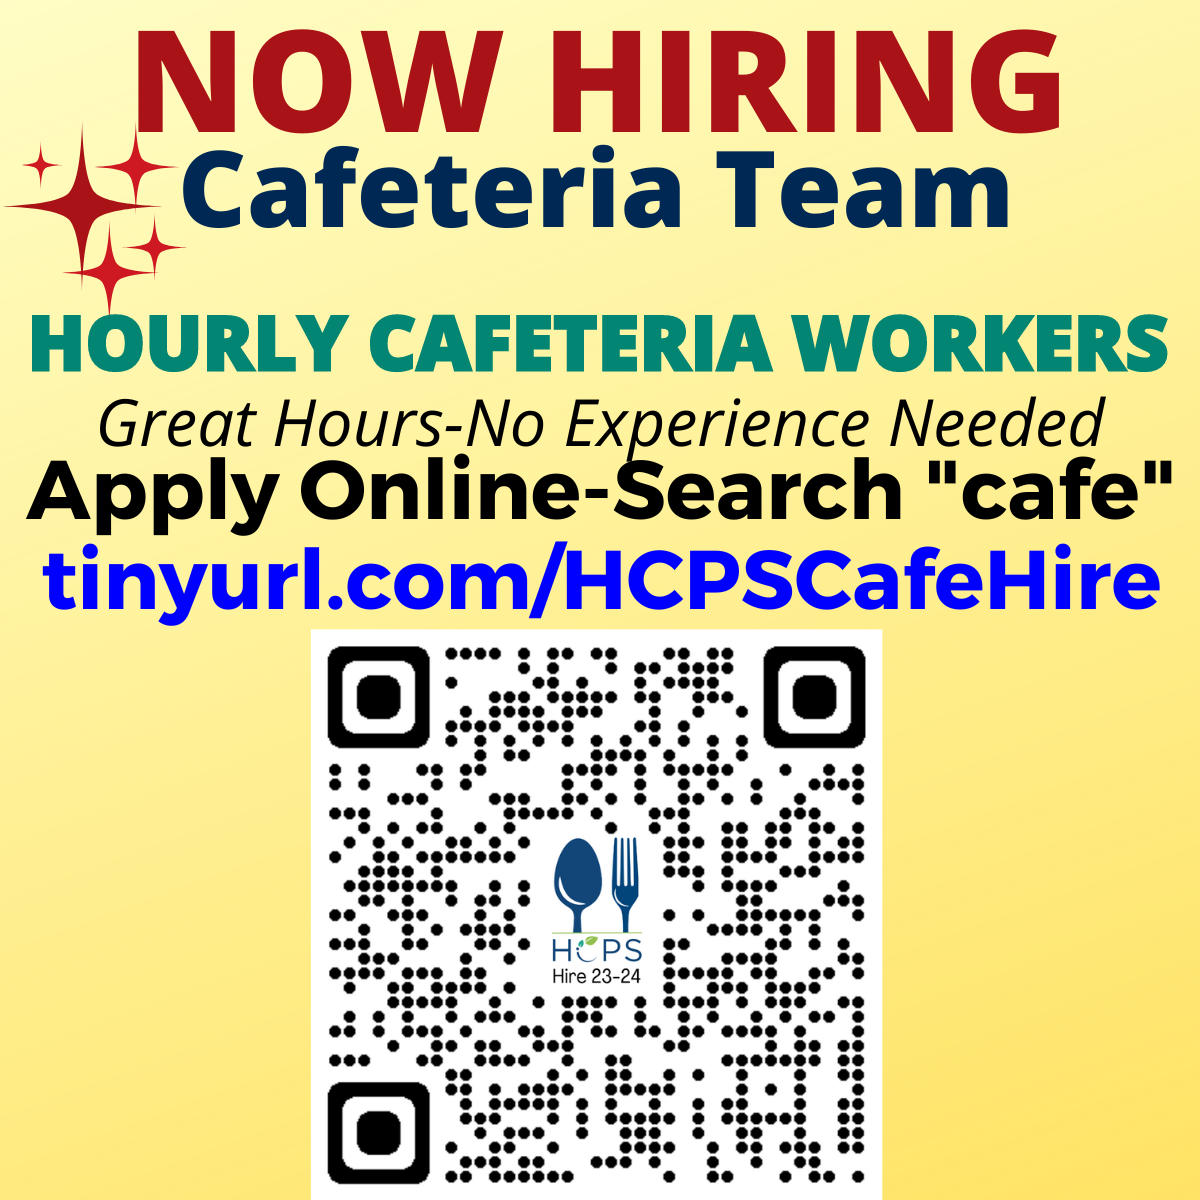 Now Hiring Cafeteria team Hourly Cafeteria Workers Apply Online or scan QR code